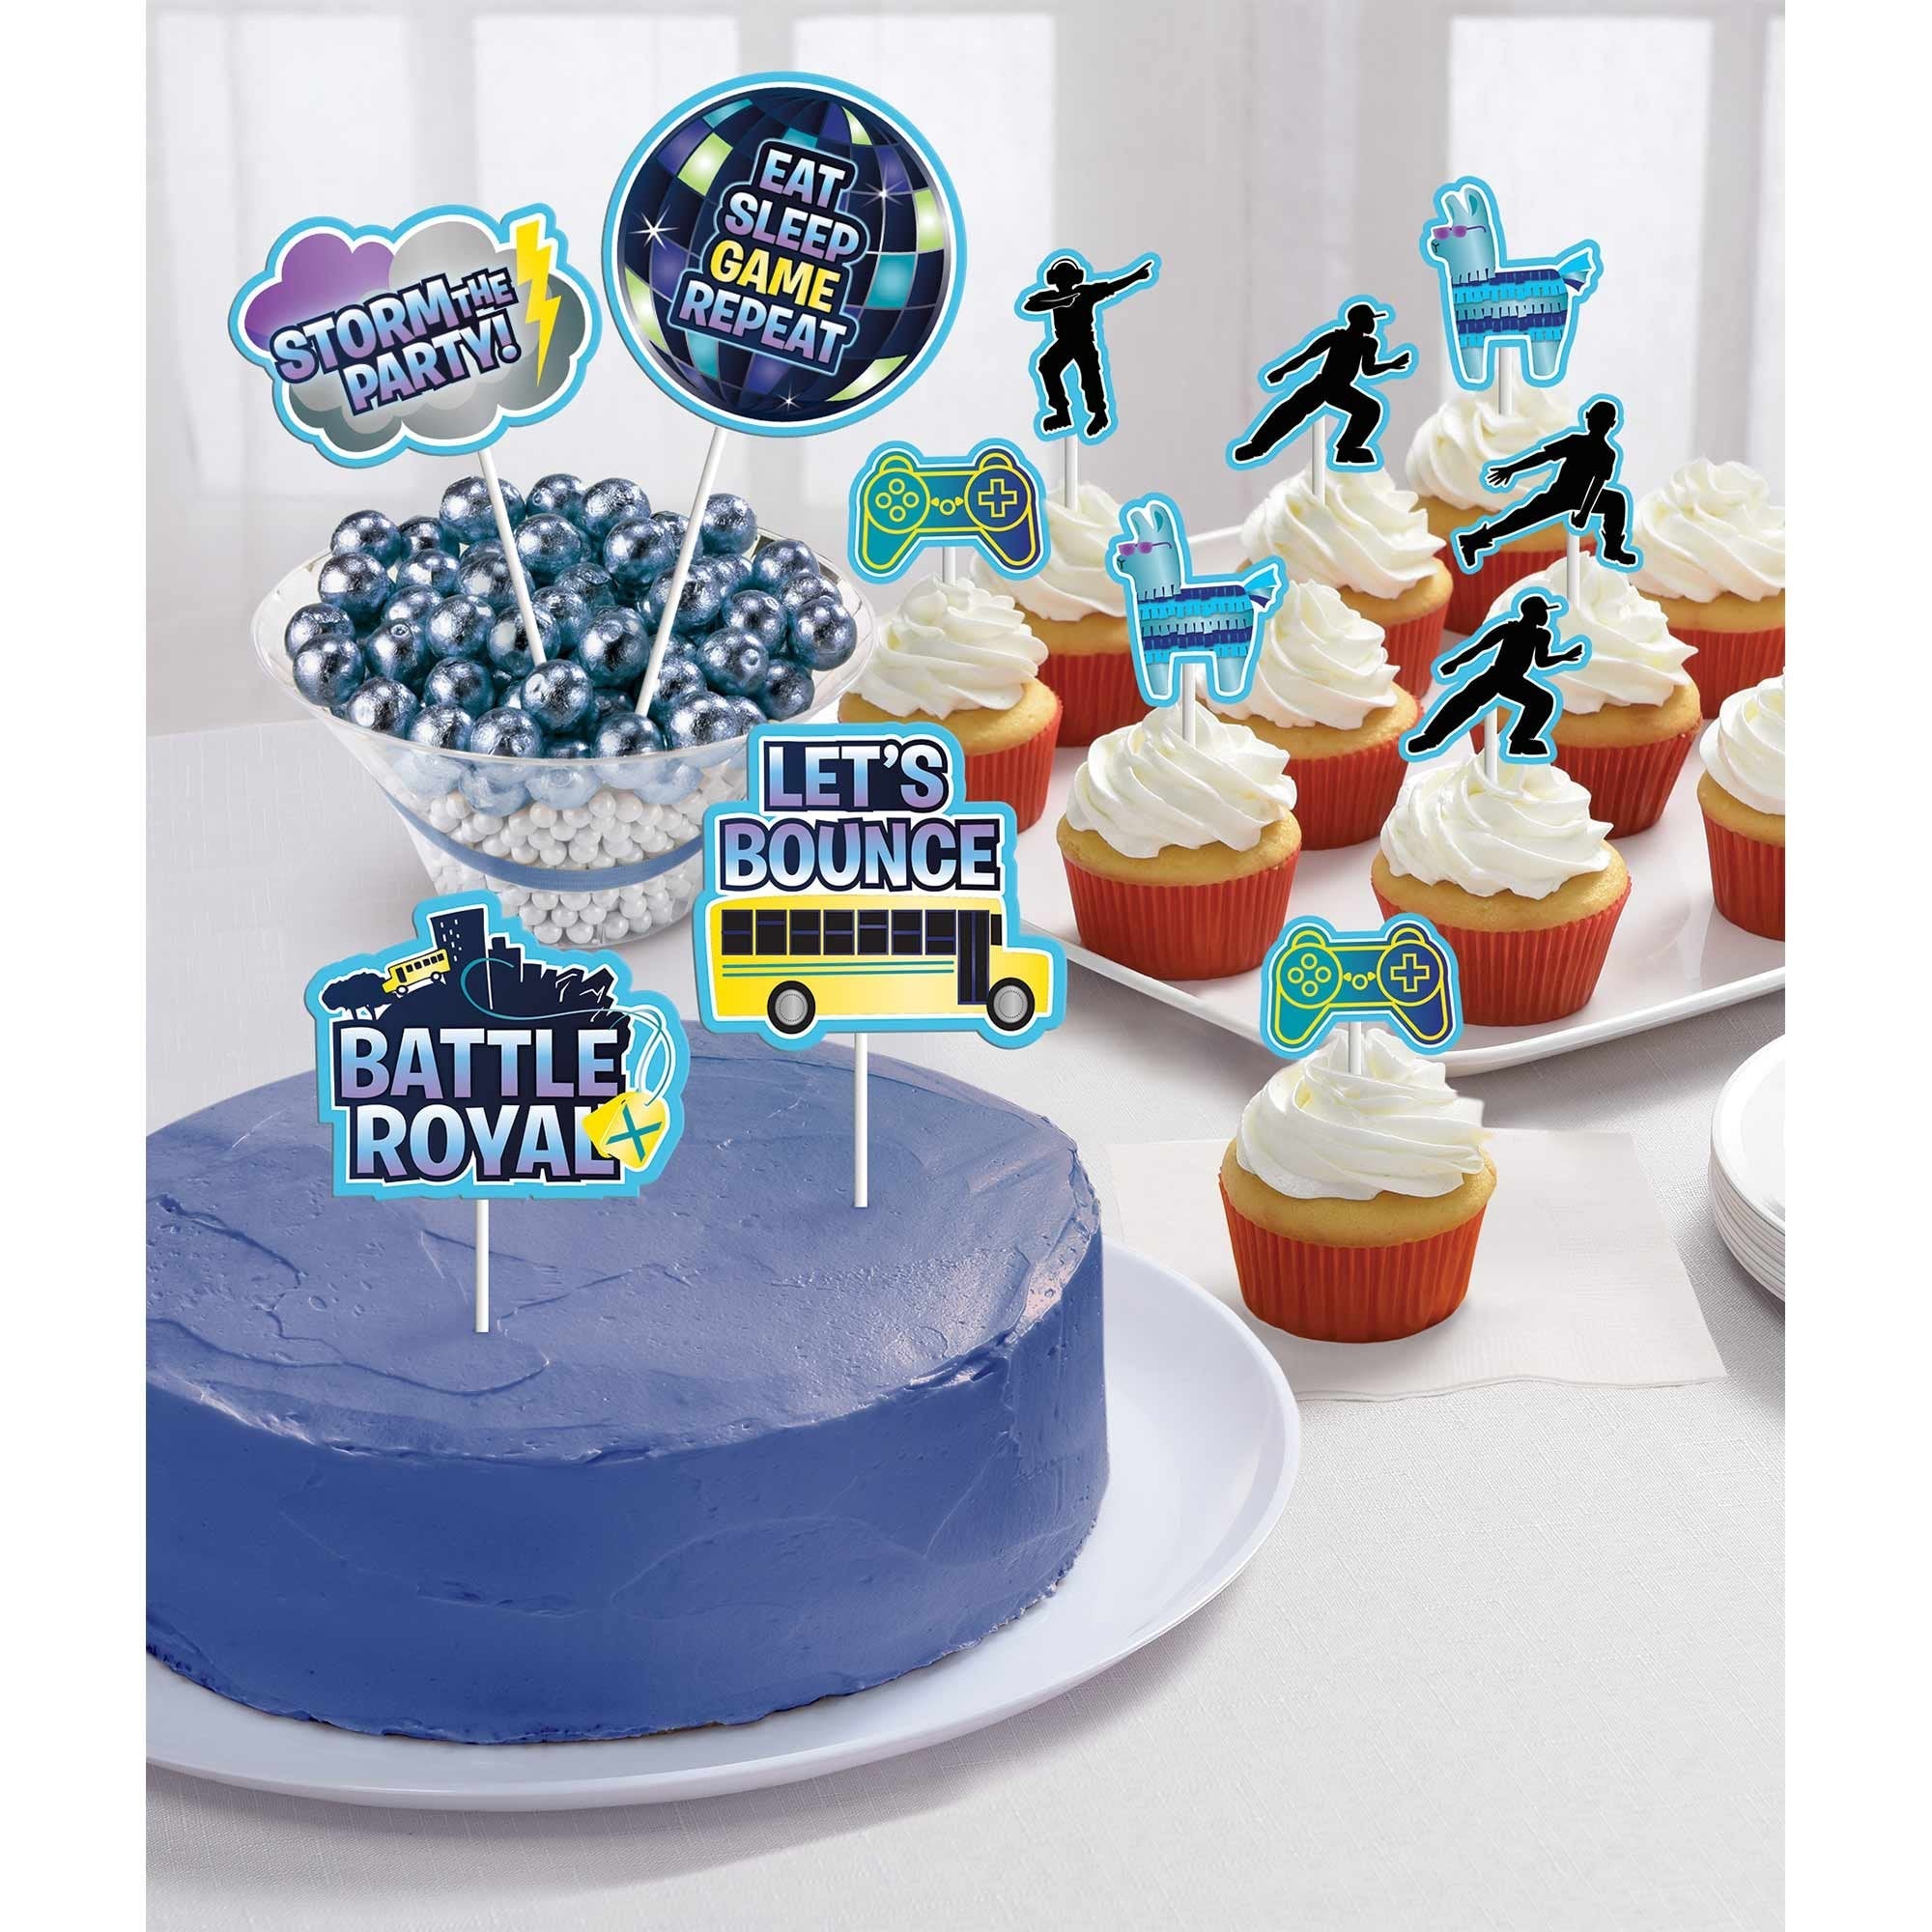 Get ready to drop the ultimate celebration! Transform your event into a thrilling battleground with Party Empress' Battle Royale-themed party decor.